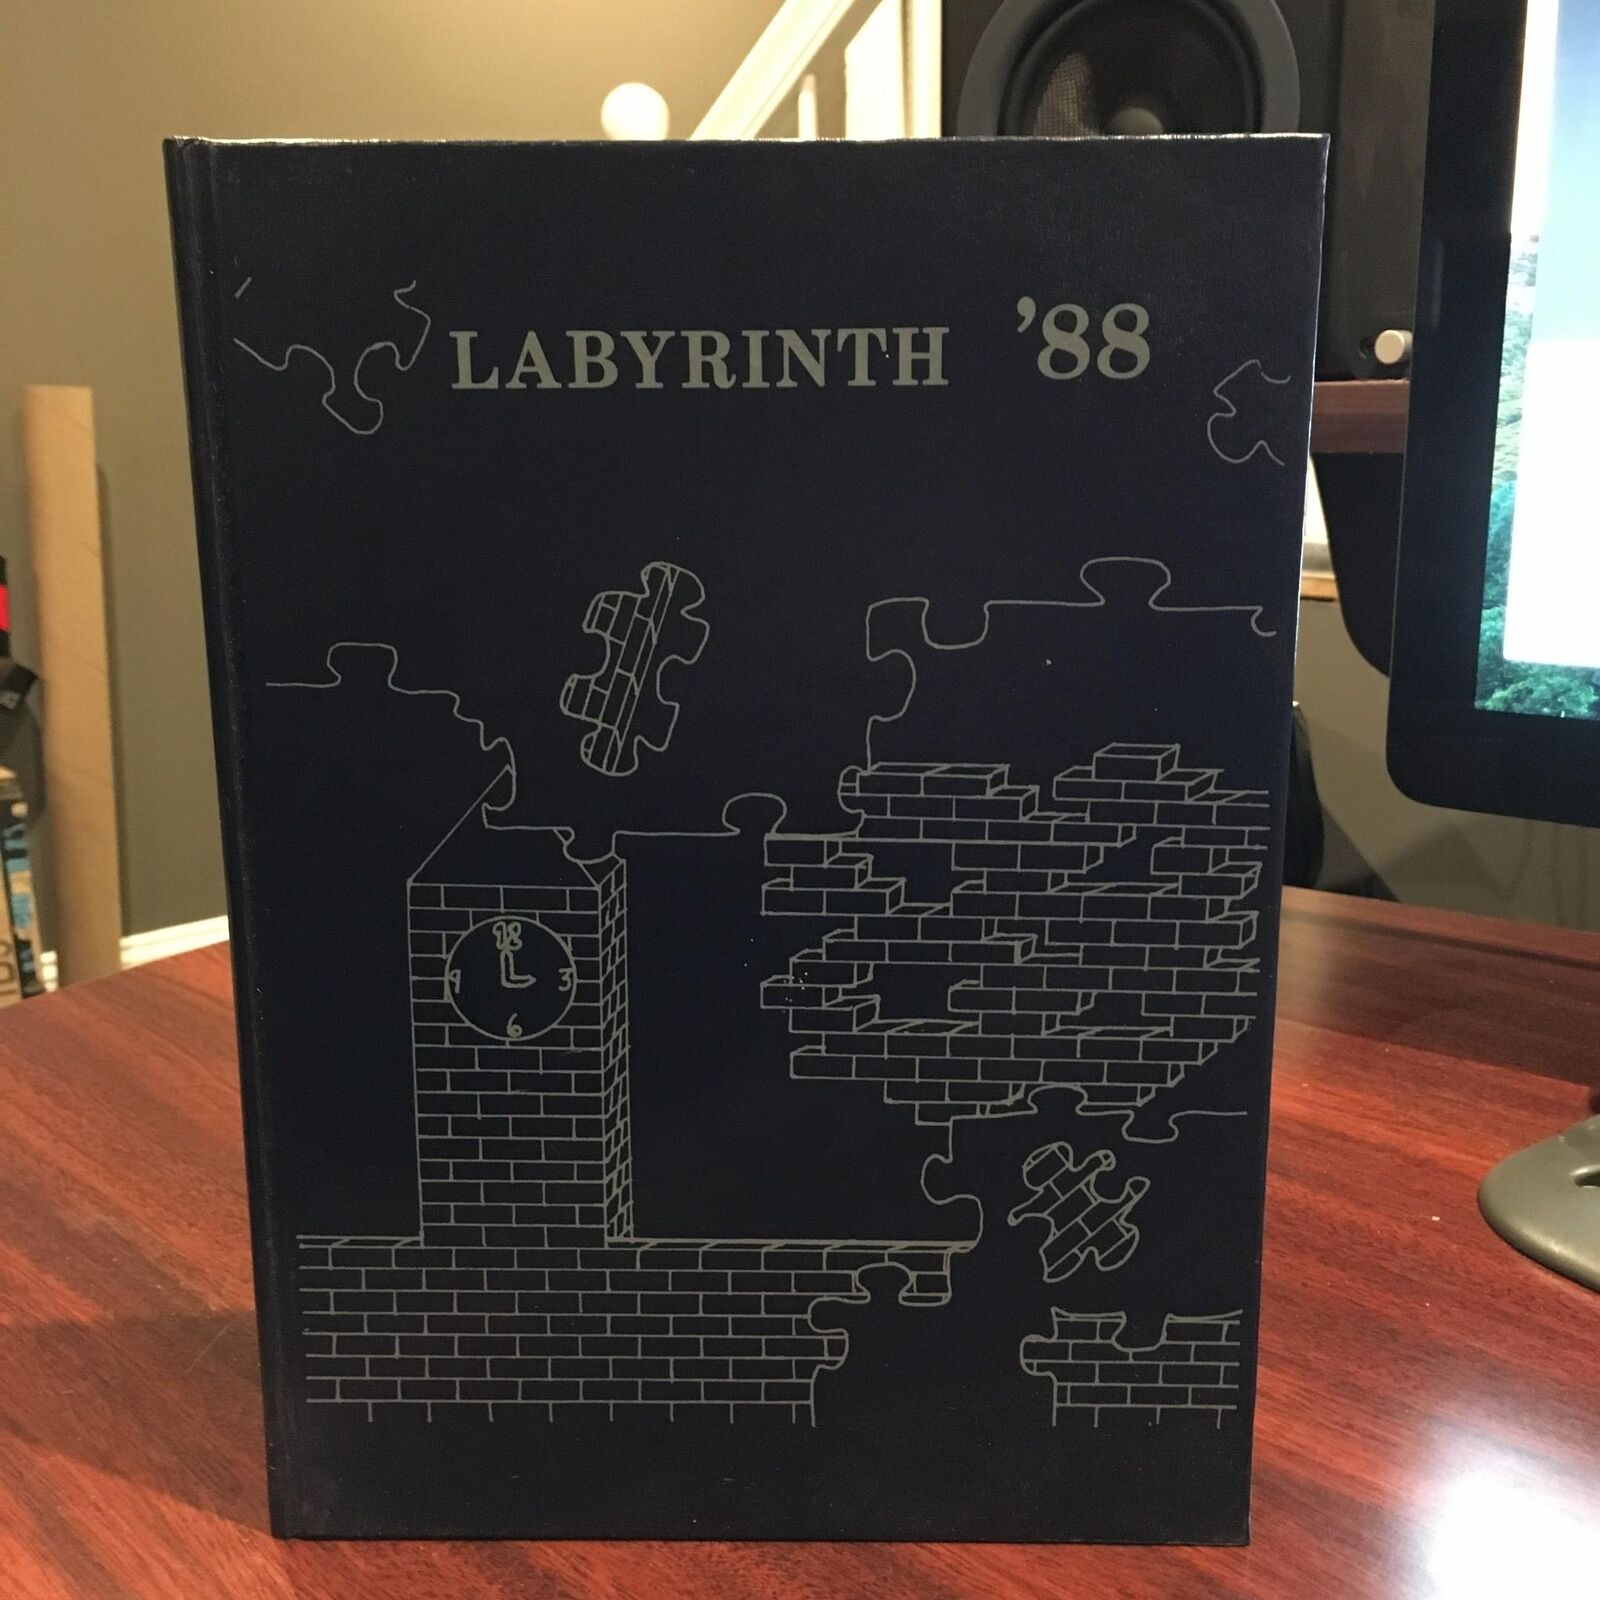 1988 Newport Mills Middle School Yearbook- Kensington, MD - Labyrinth 